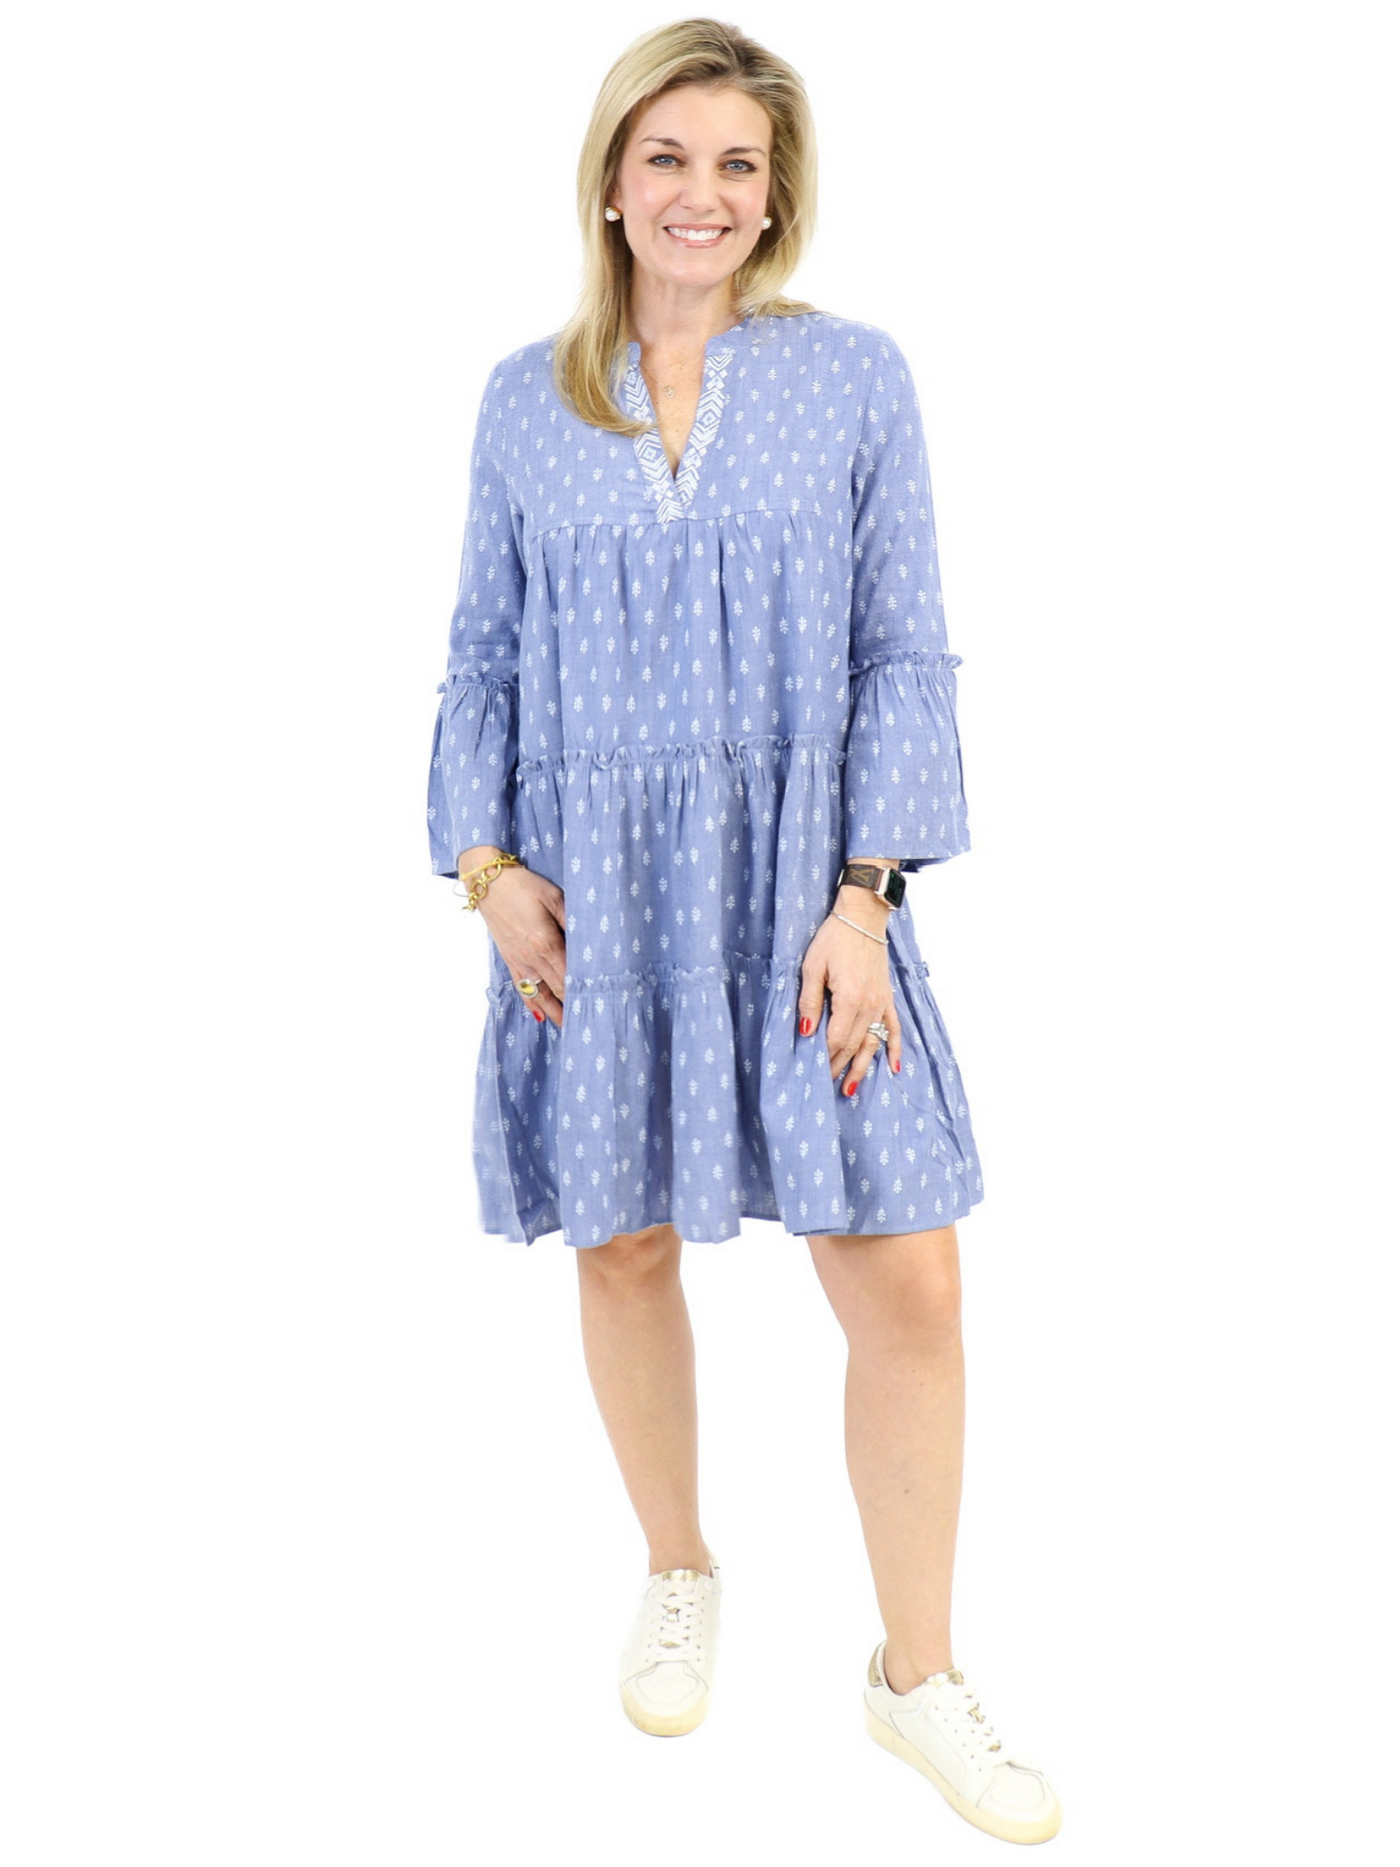 Chambray Peasant Dress - Blue front view size Small.